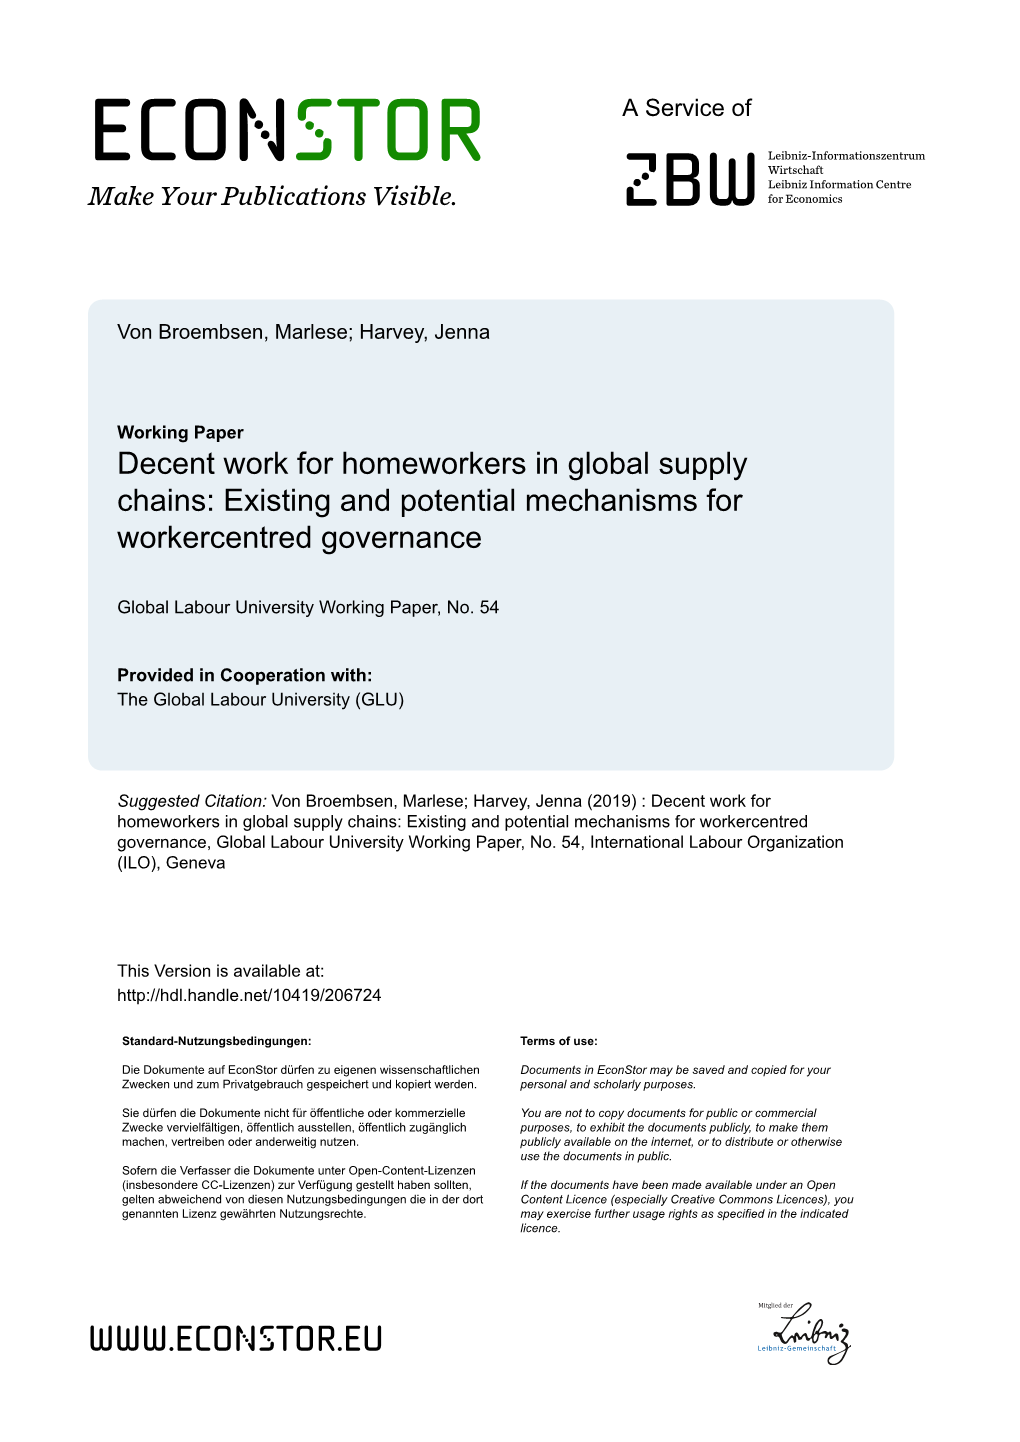 Decent Work for Homeworkers in Global Supply Chains: Existing and Potential Mechanisms for Workercentred Governance